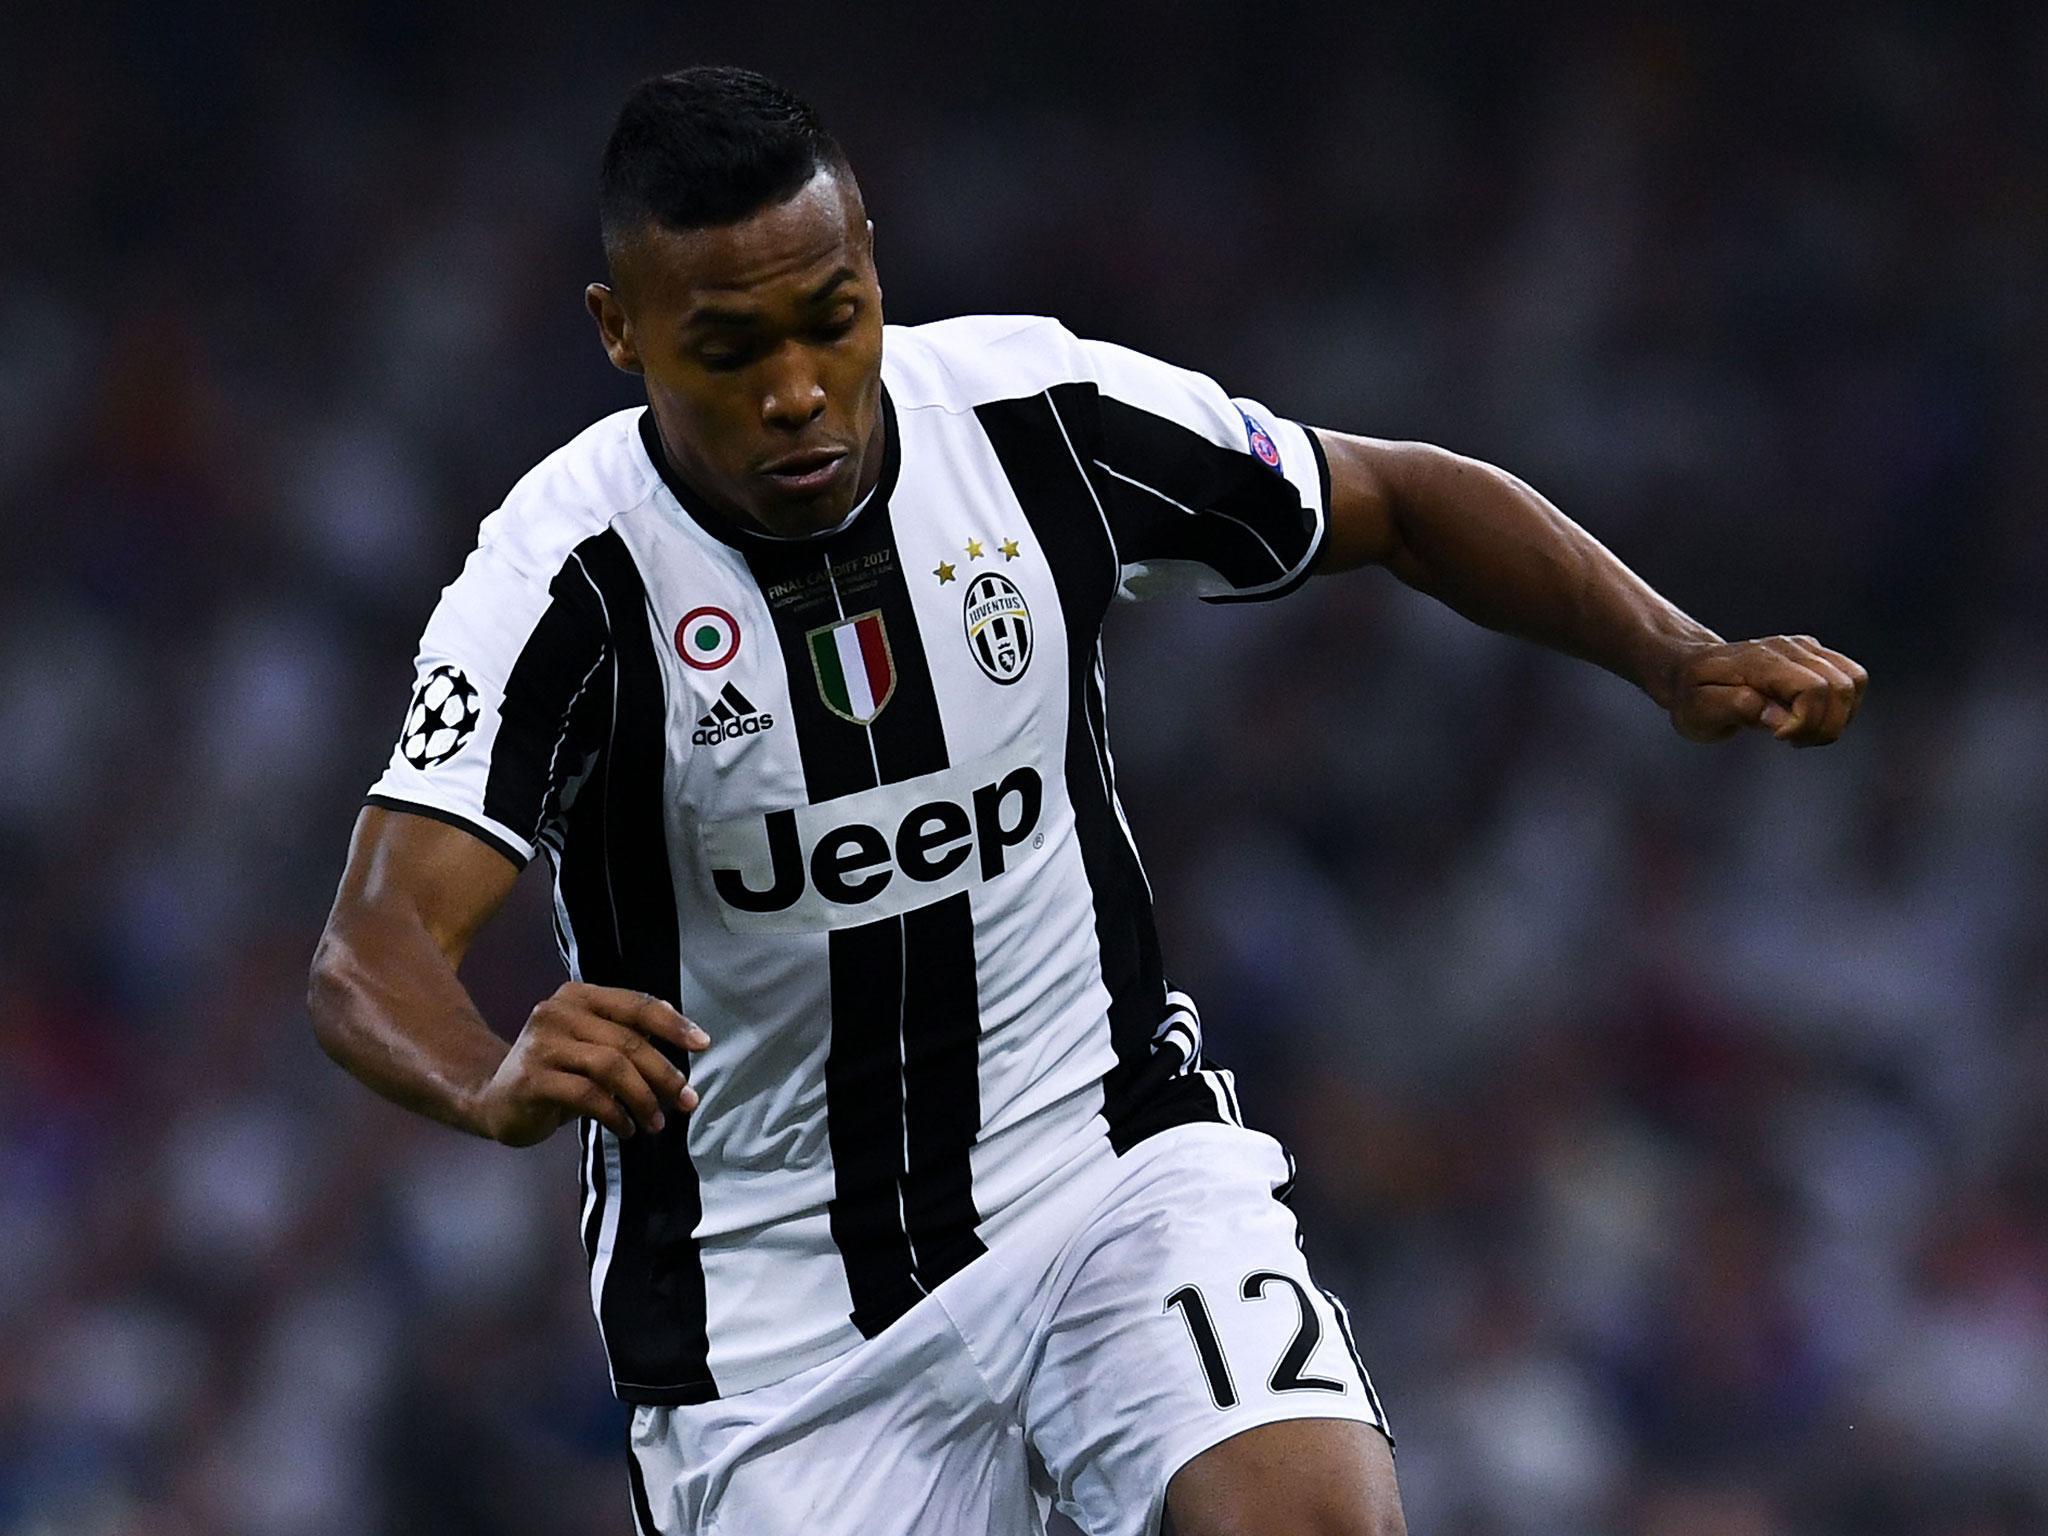 Alex Sandro has been linked with a move to Chelsea